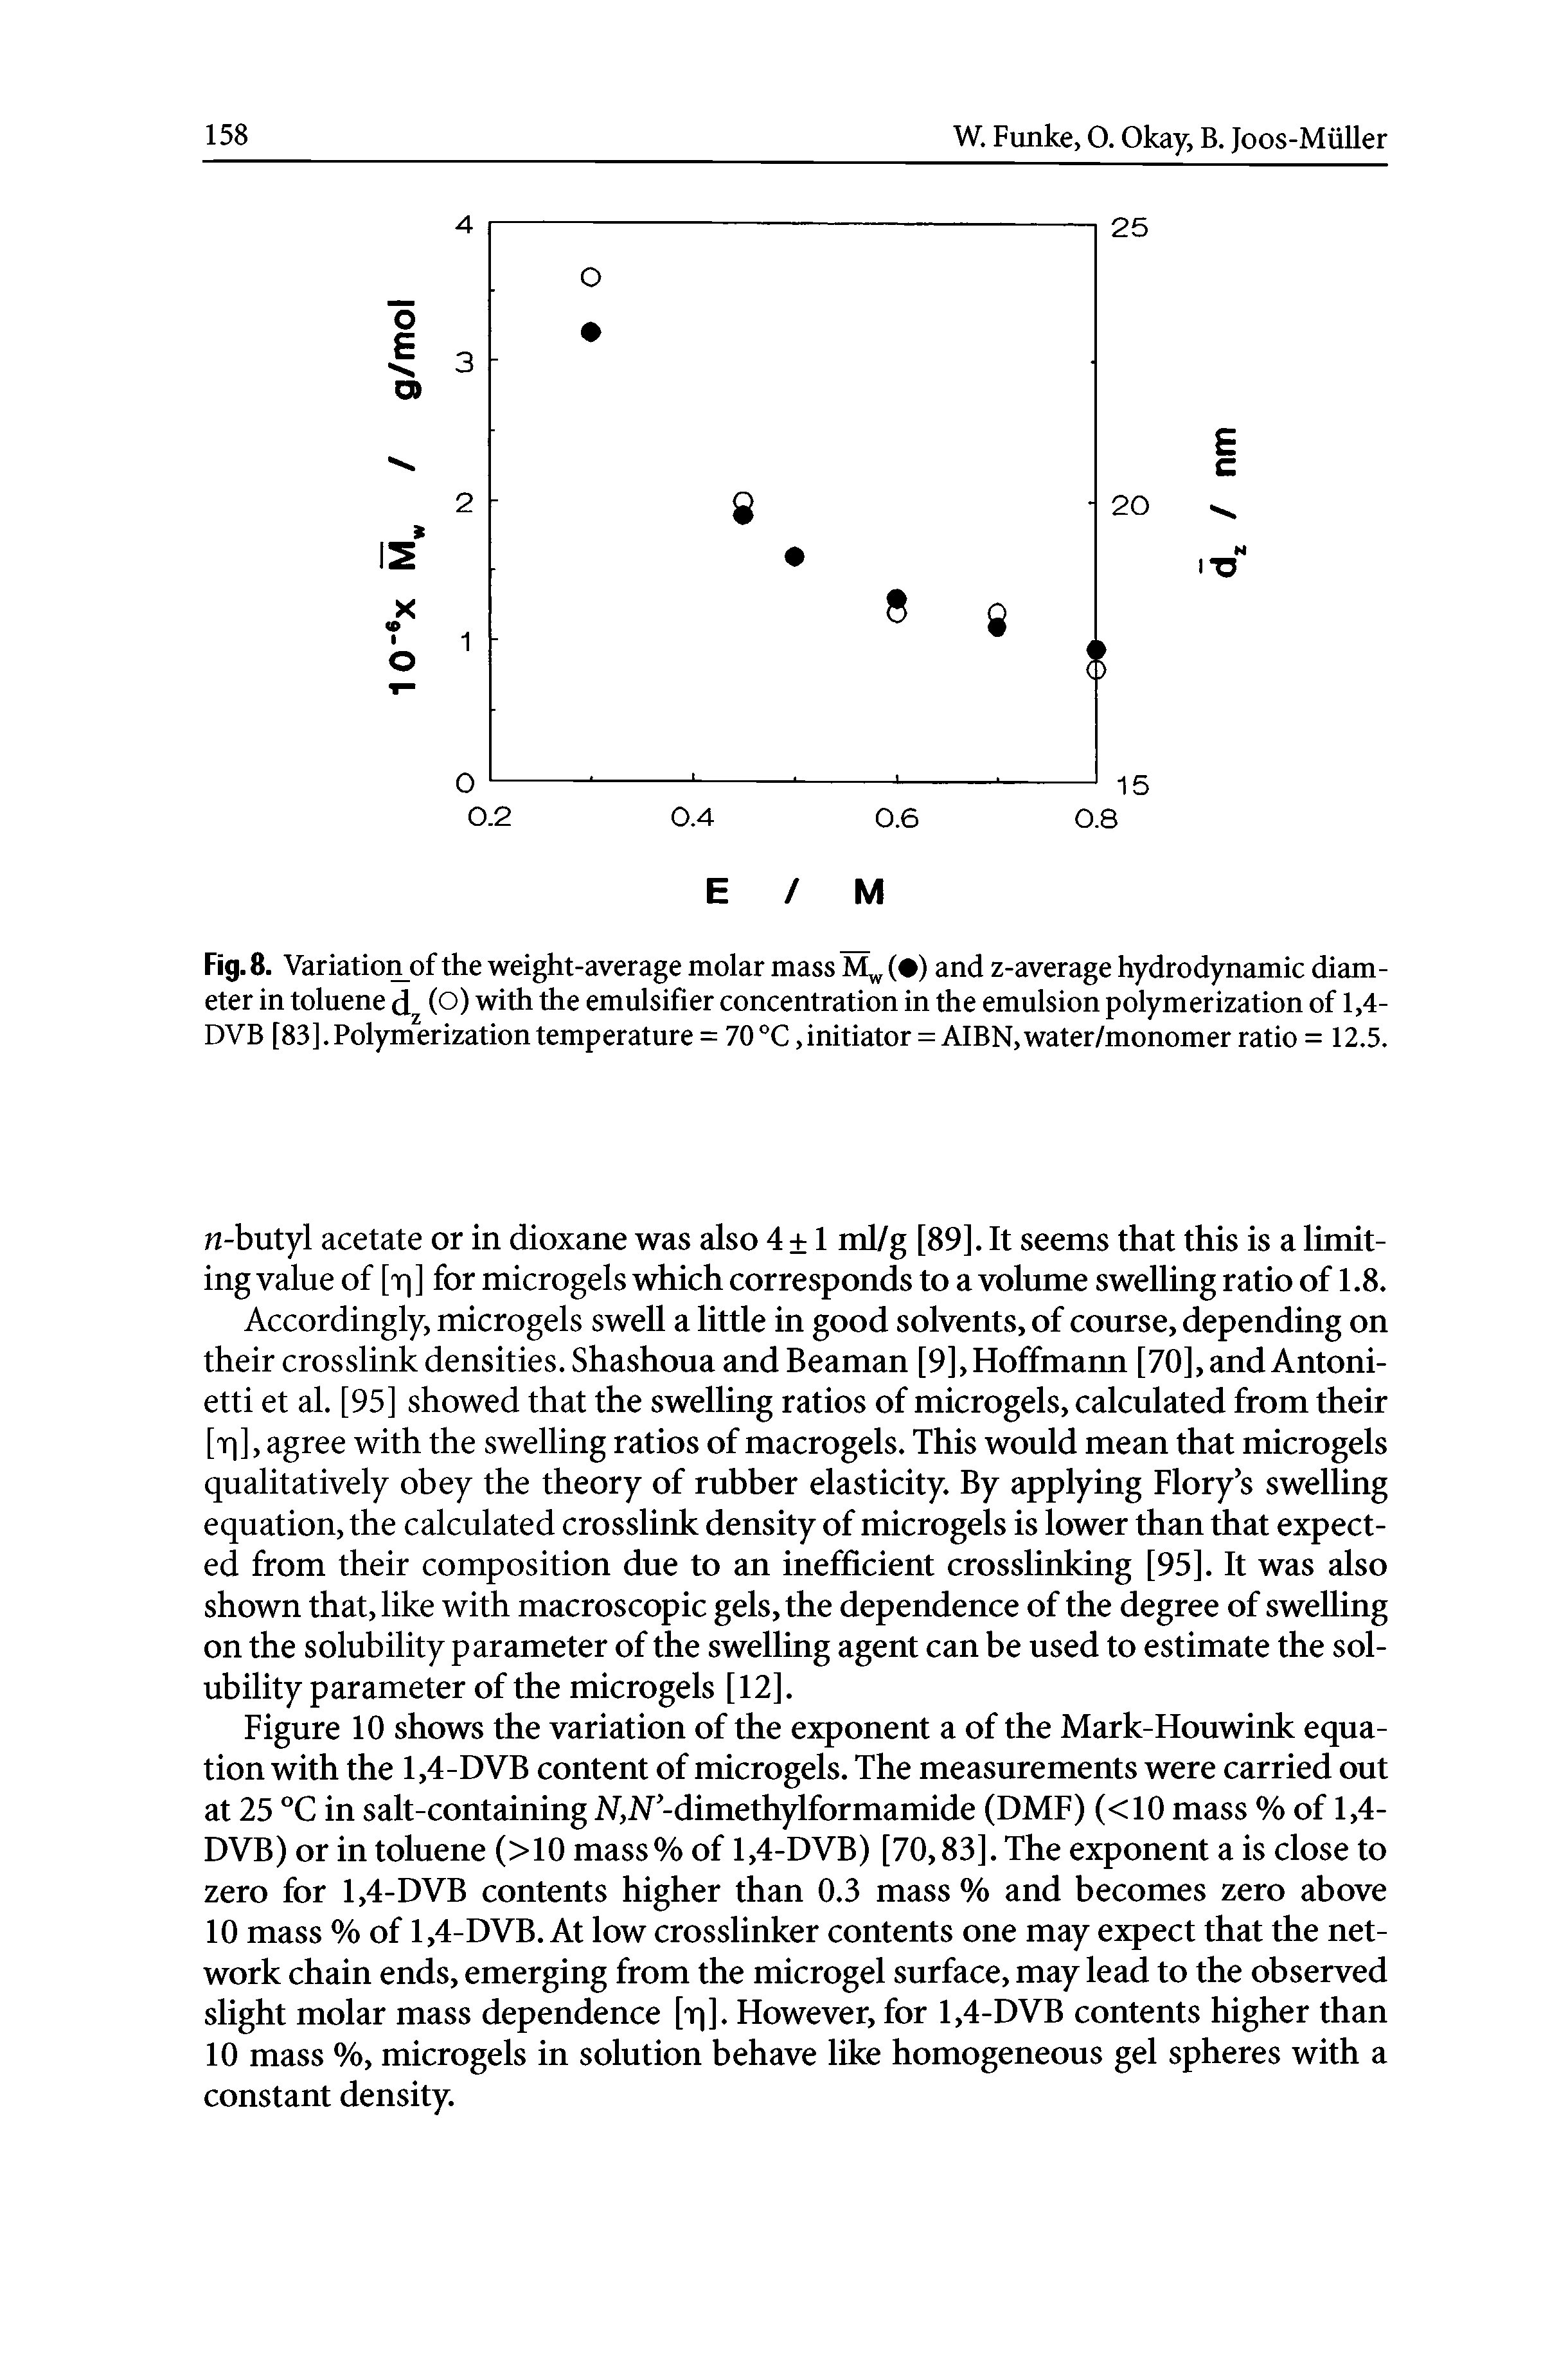 Fig. 8. Variationof the weight-average molar mass Mw ( ) and z-average hydrodynamic diameter in toluene dz (o) with the emulsifier concentration in the emulsion polymerization of 1,4-DVB [83]. Polymerization temperature = 70 °C, initiator = AIBN, water/monomer ratio = 12.5.